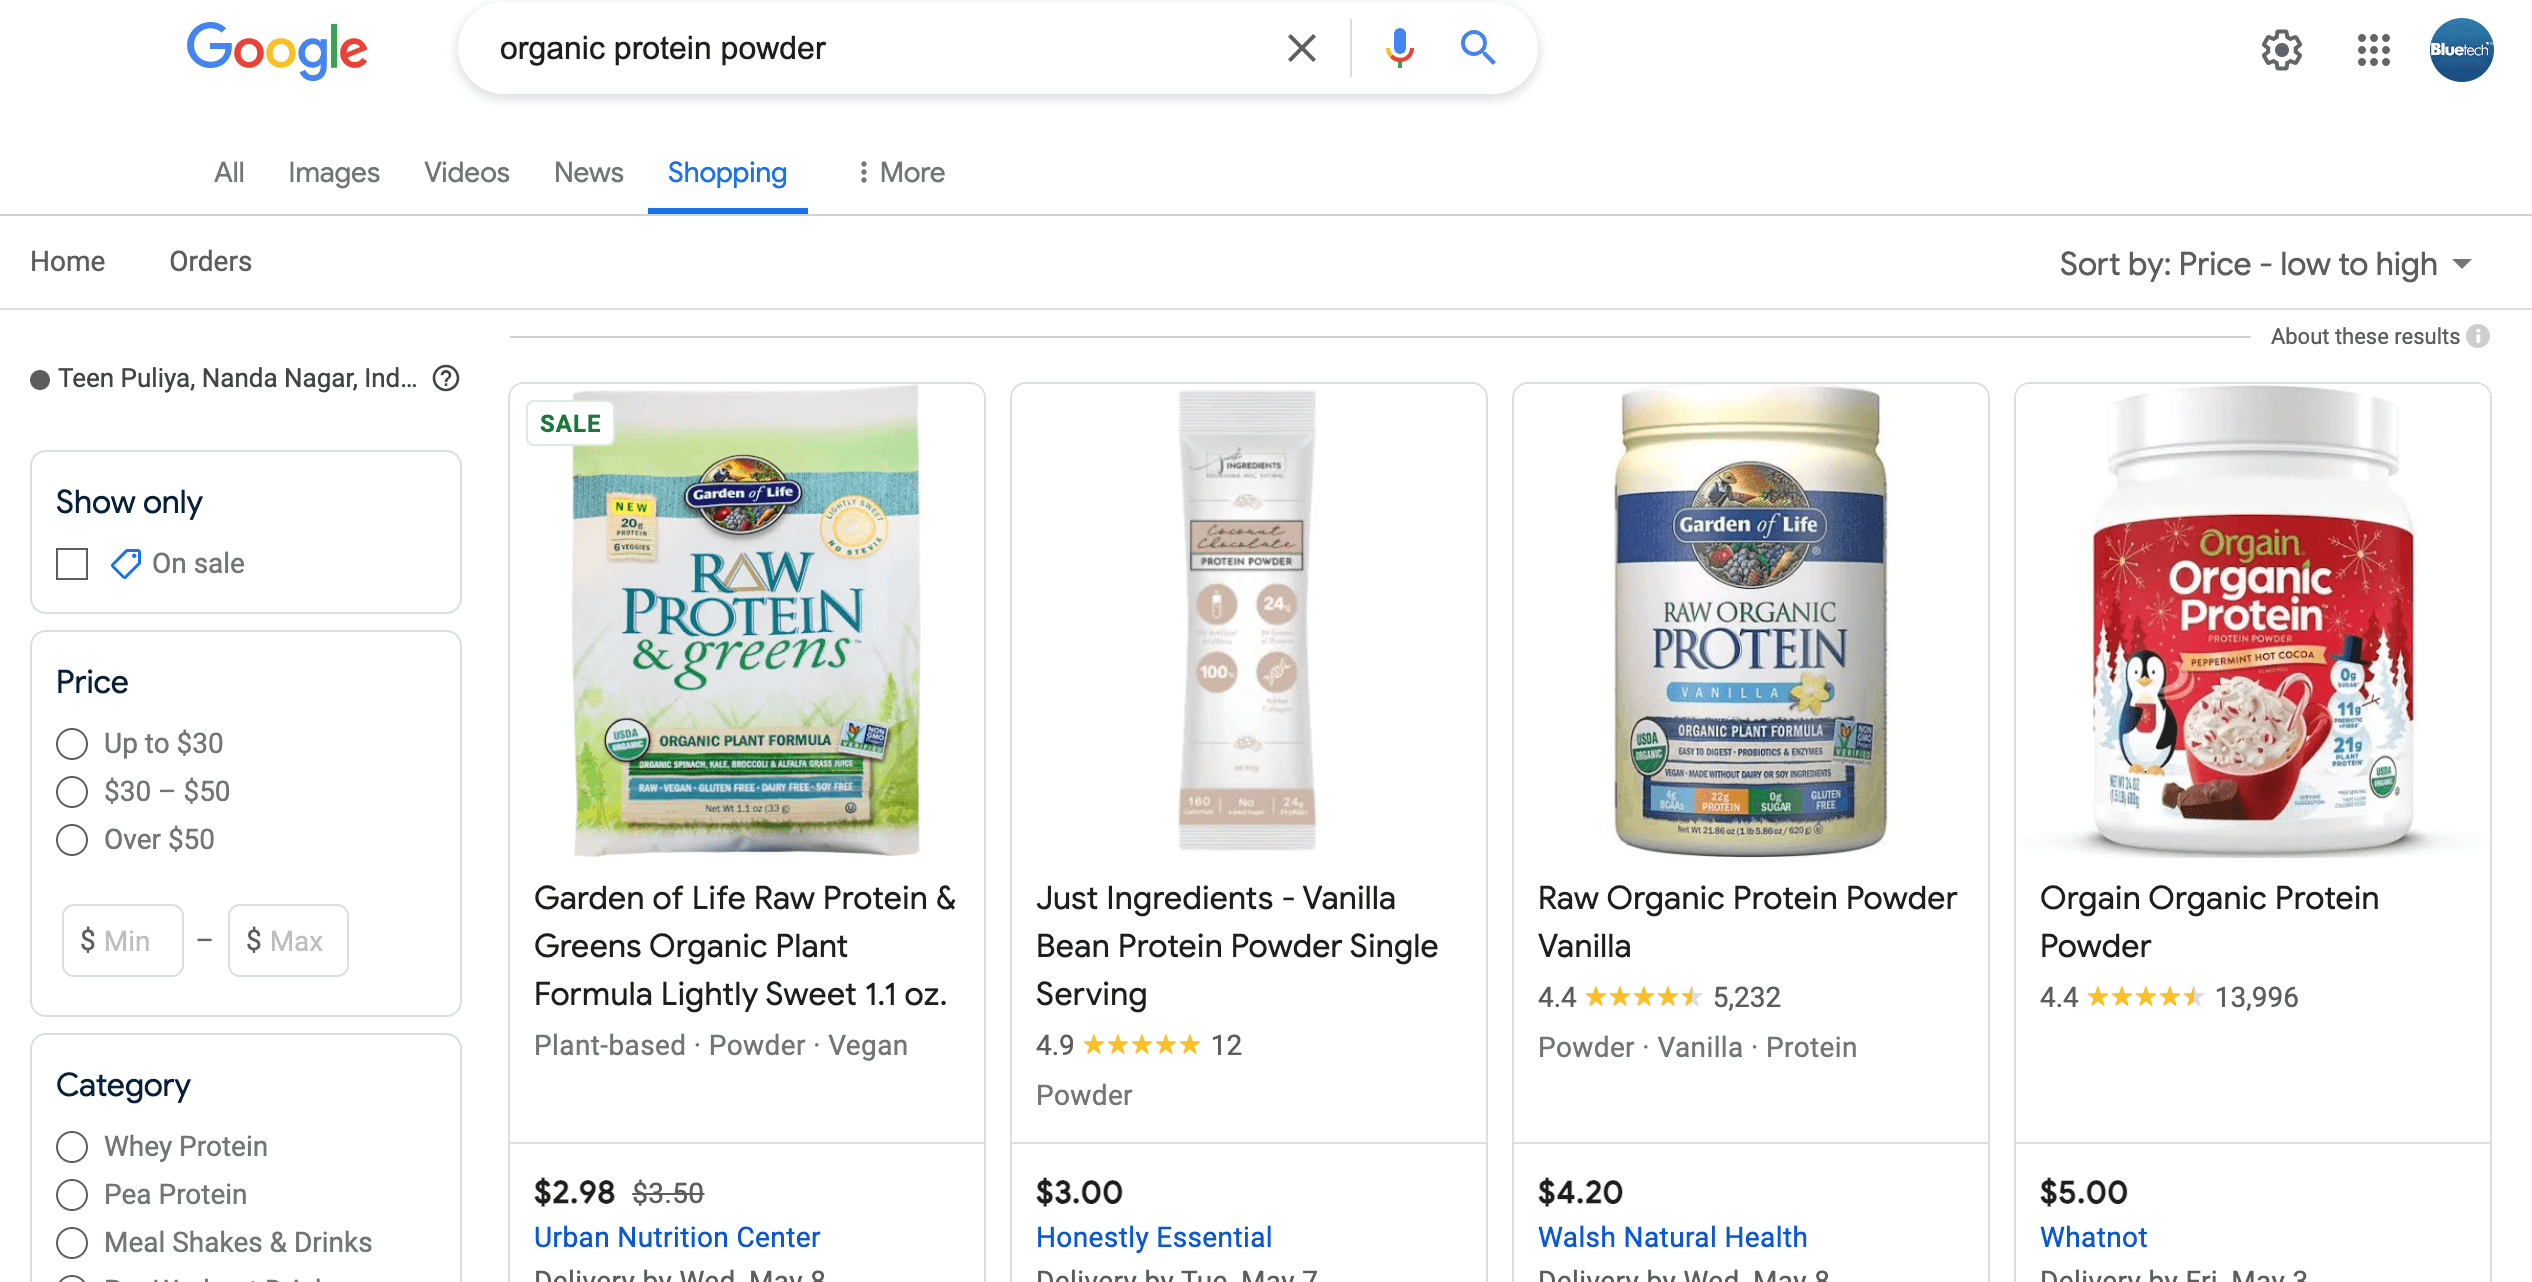 Google Shopping listing services: An image showing a computer screen with a well-organized product feed, optimized for maximum visibility and sales.